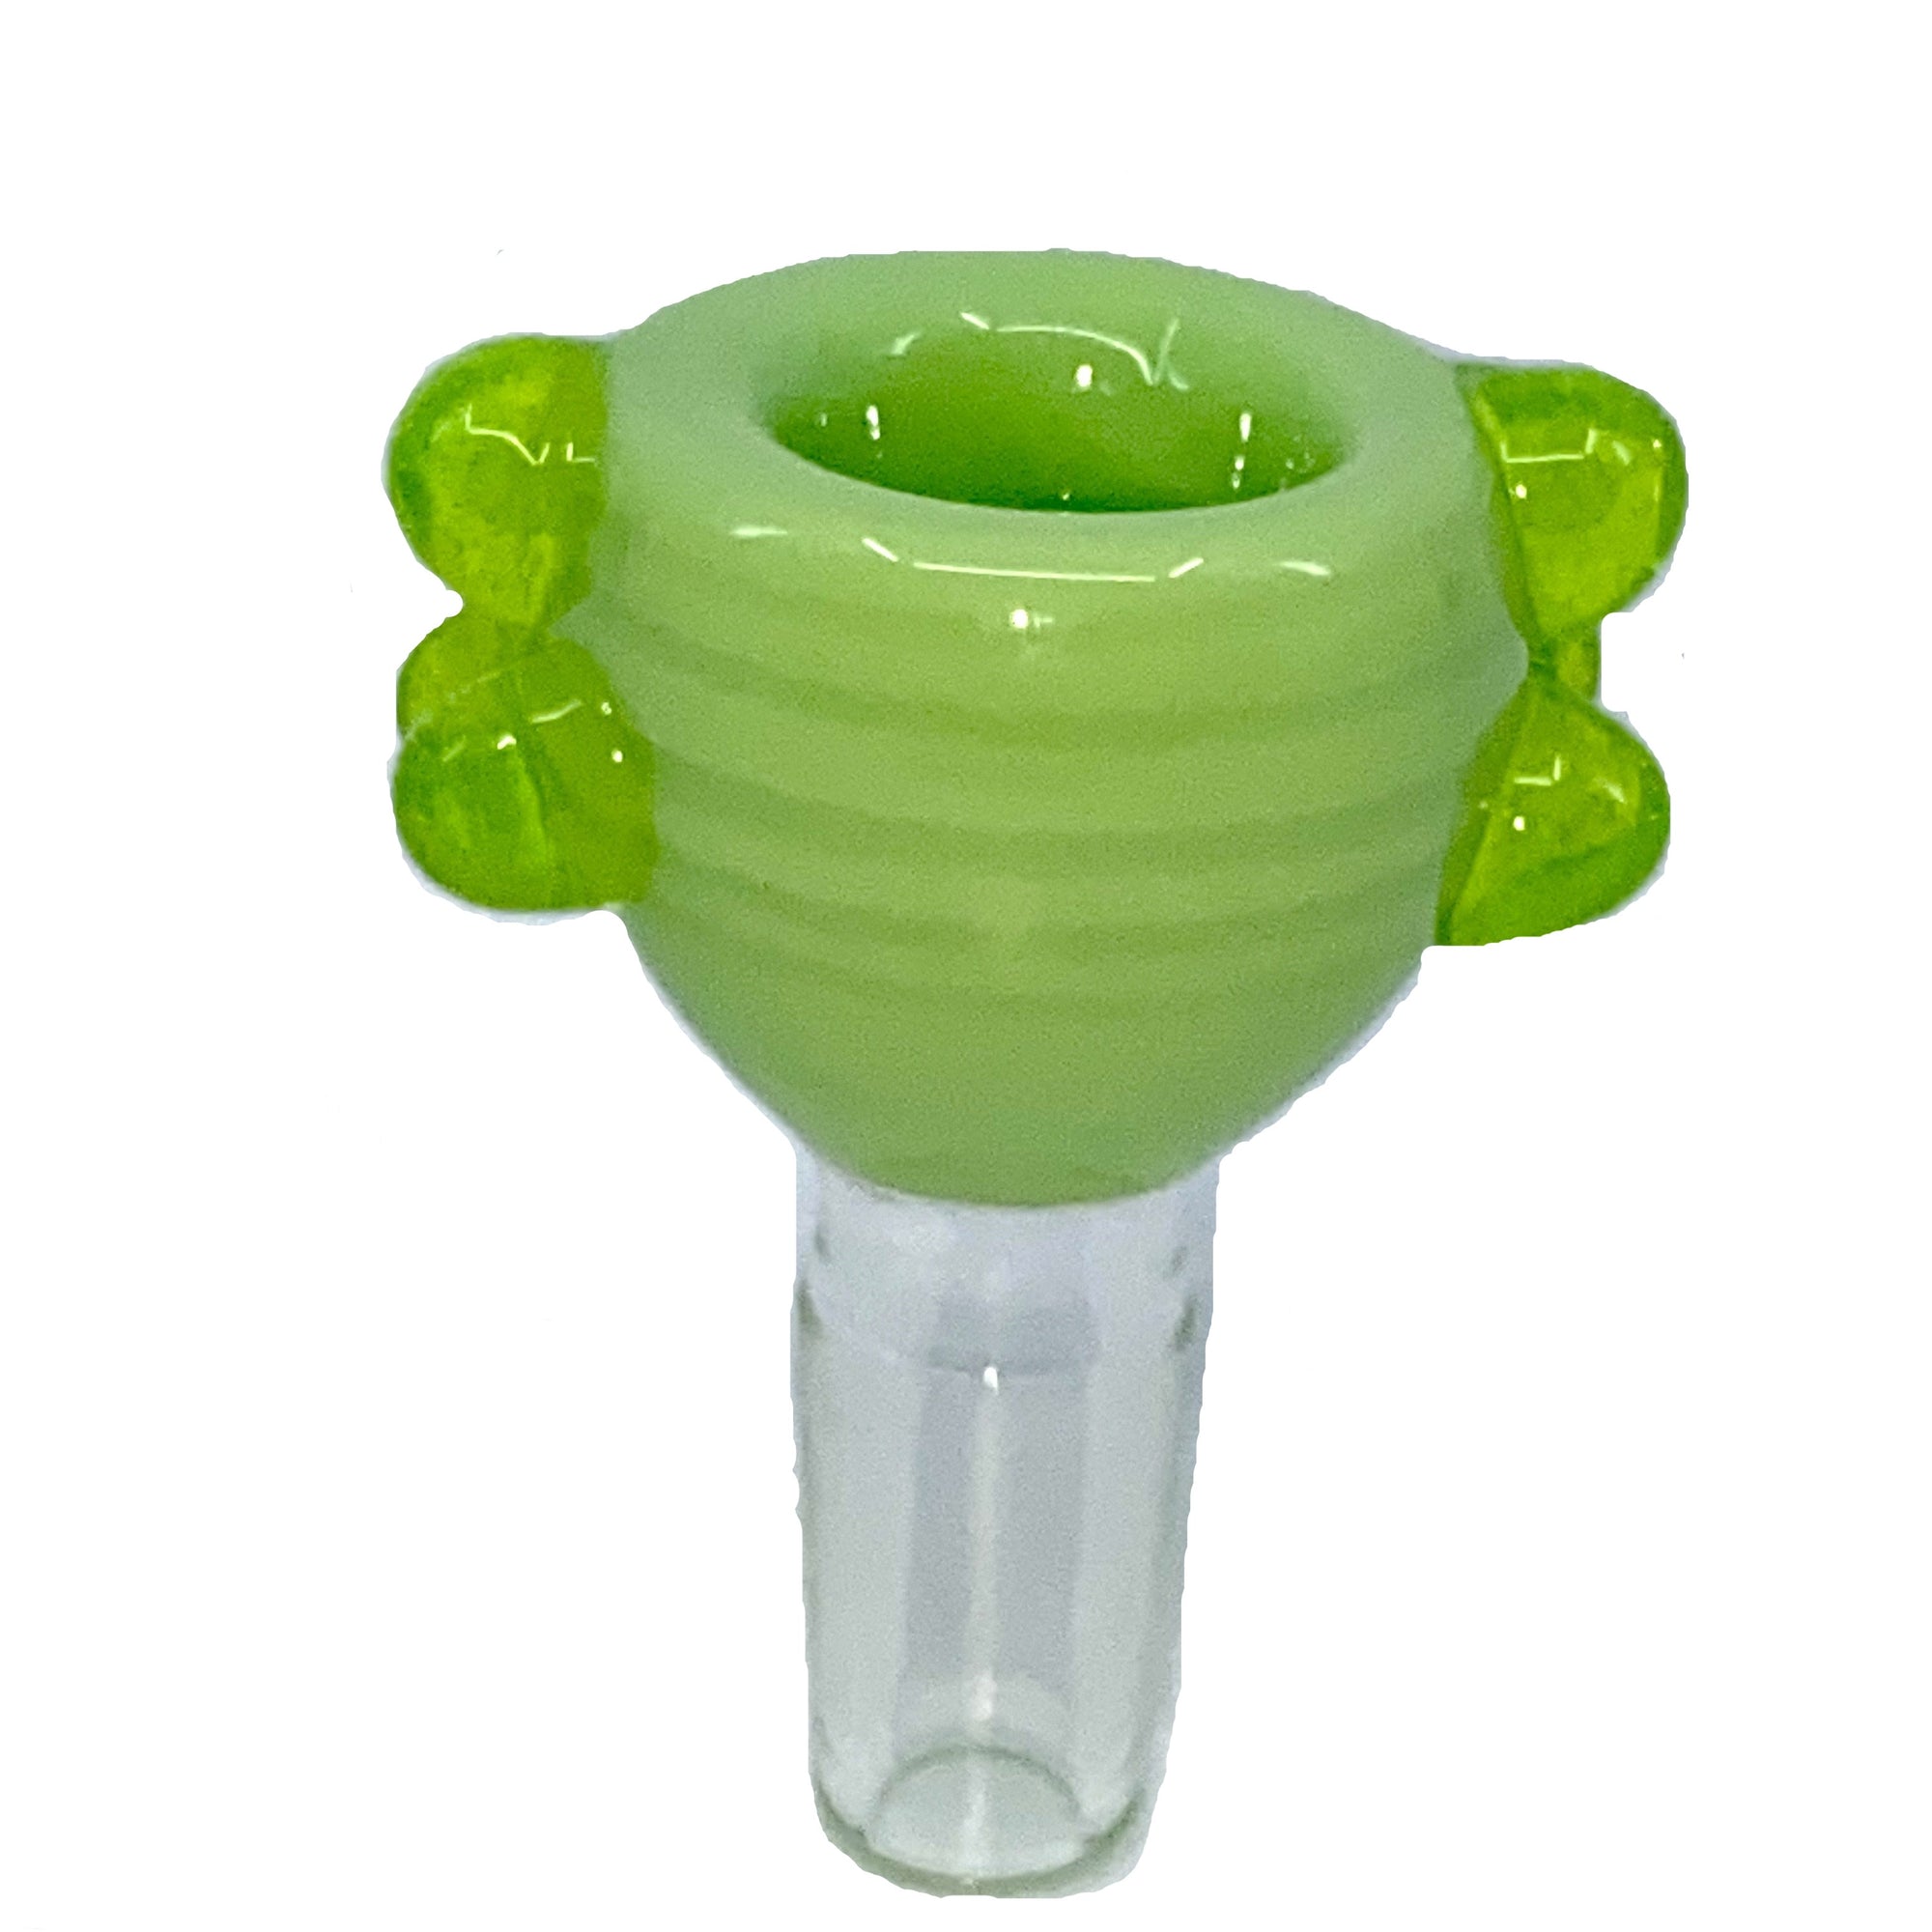 Solid Color Slide with Dot Accents 14mm (Green) show variant